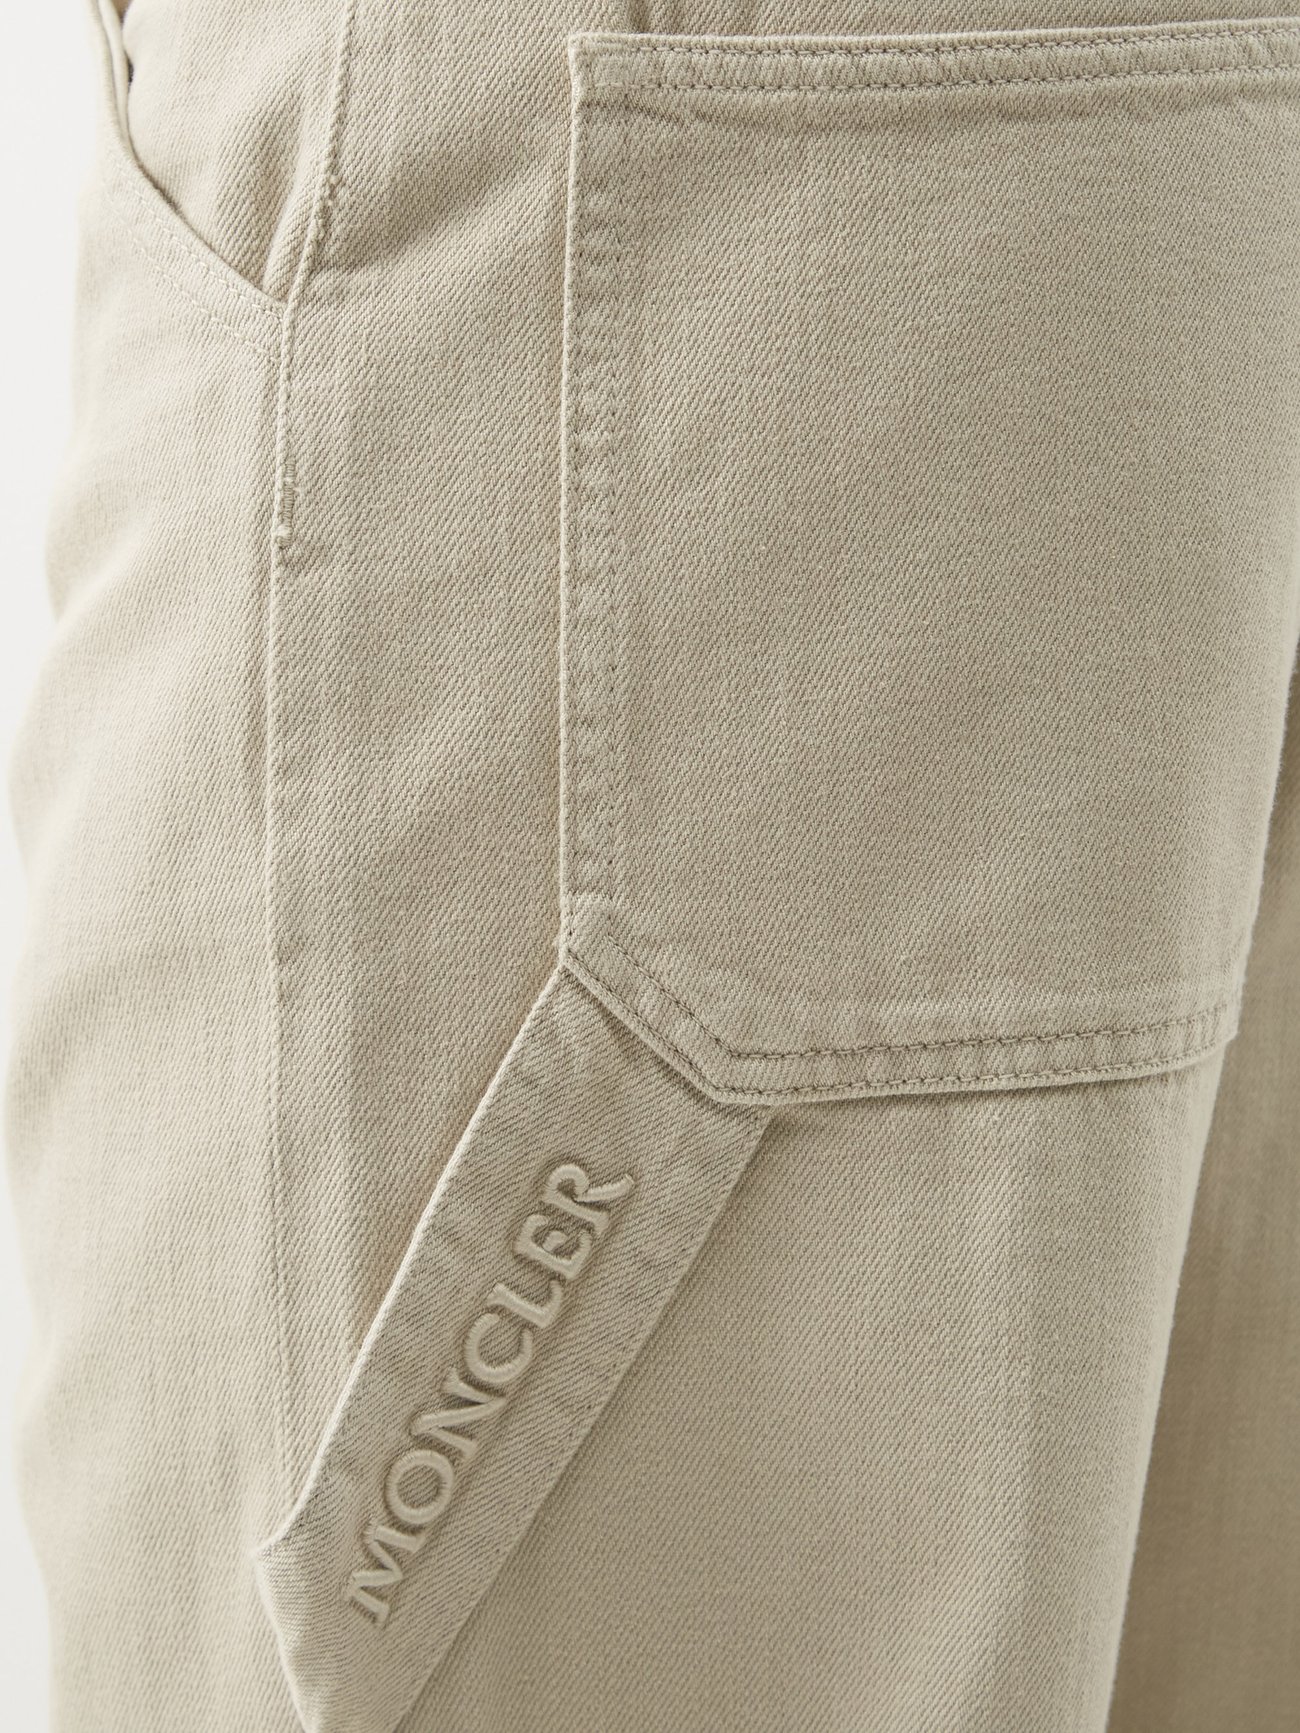 Beige 'Sportivo' trousers Moncler - Pepe Jeans seamfree set in